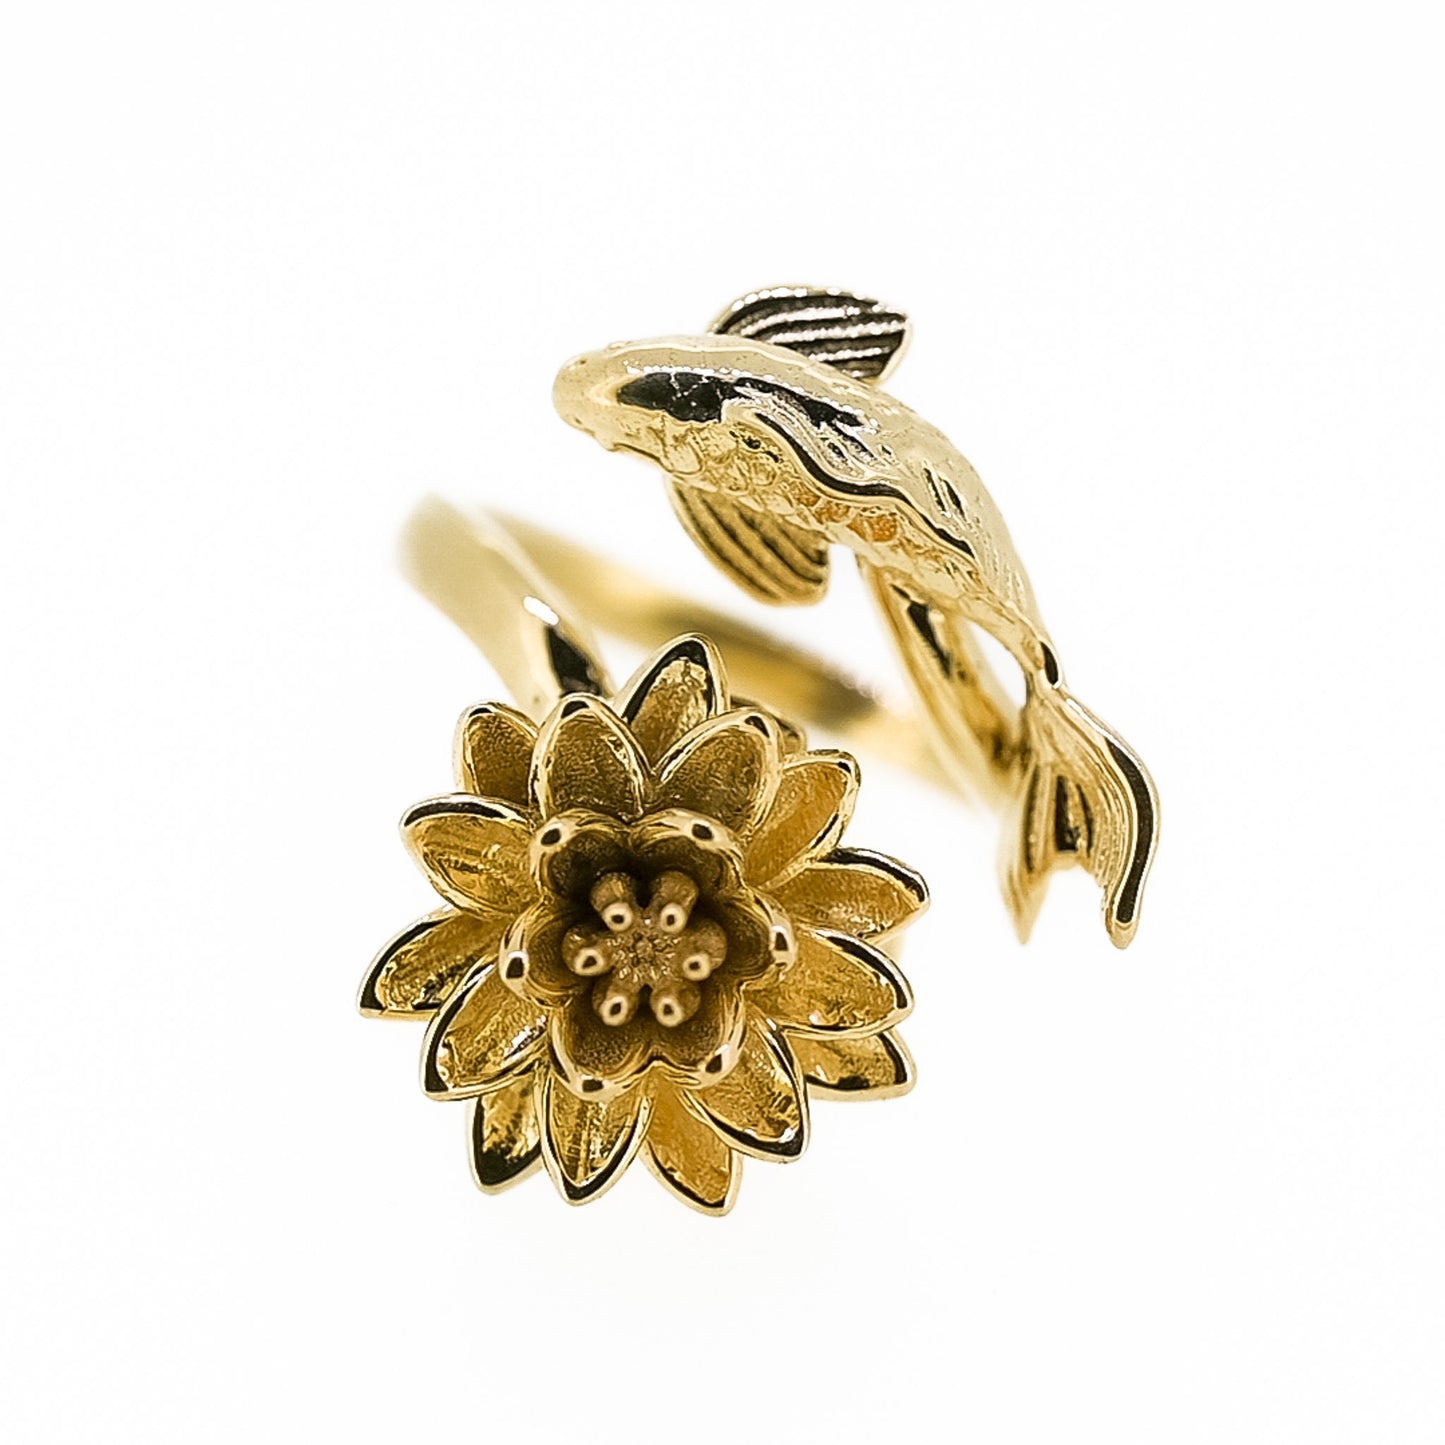 Waterlily and Koi Ring